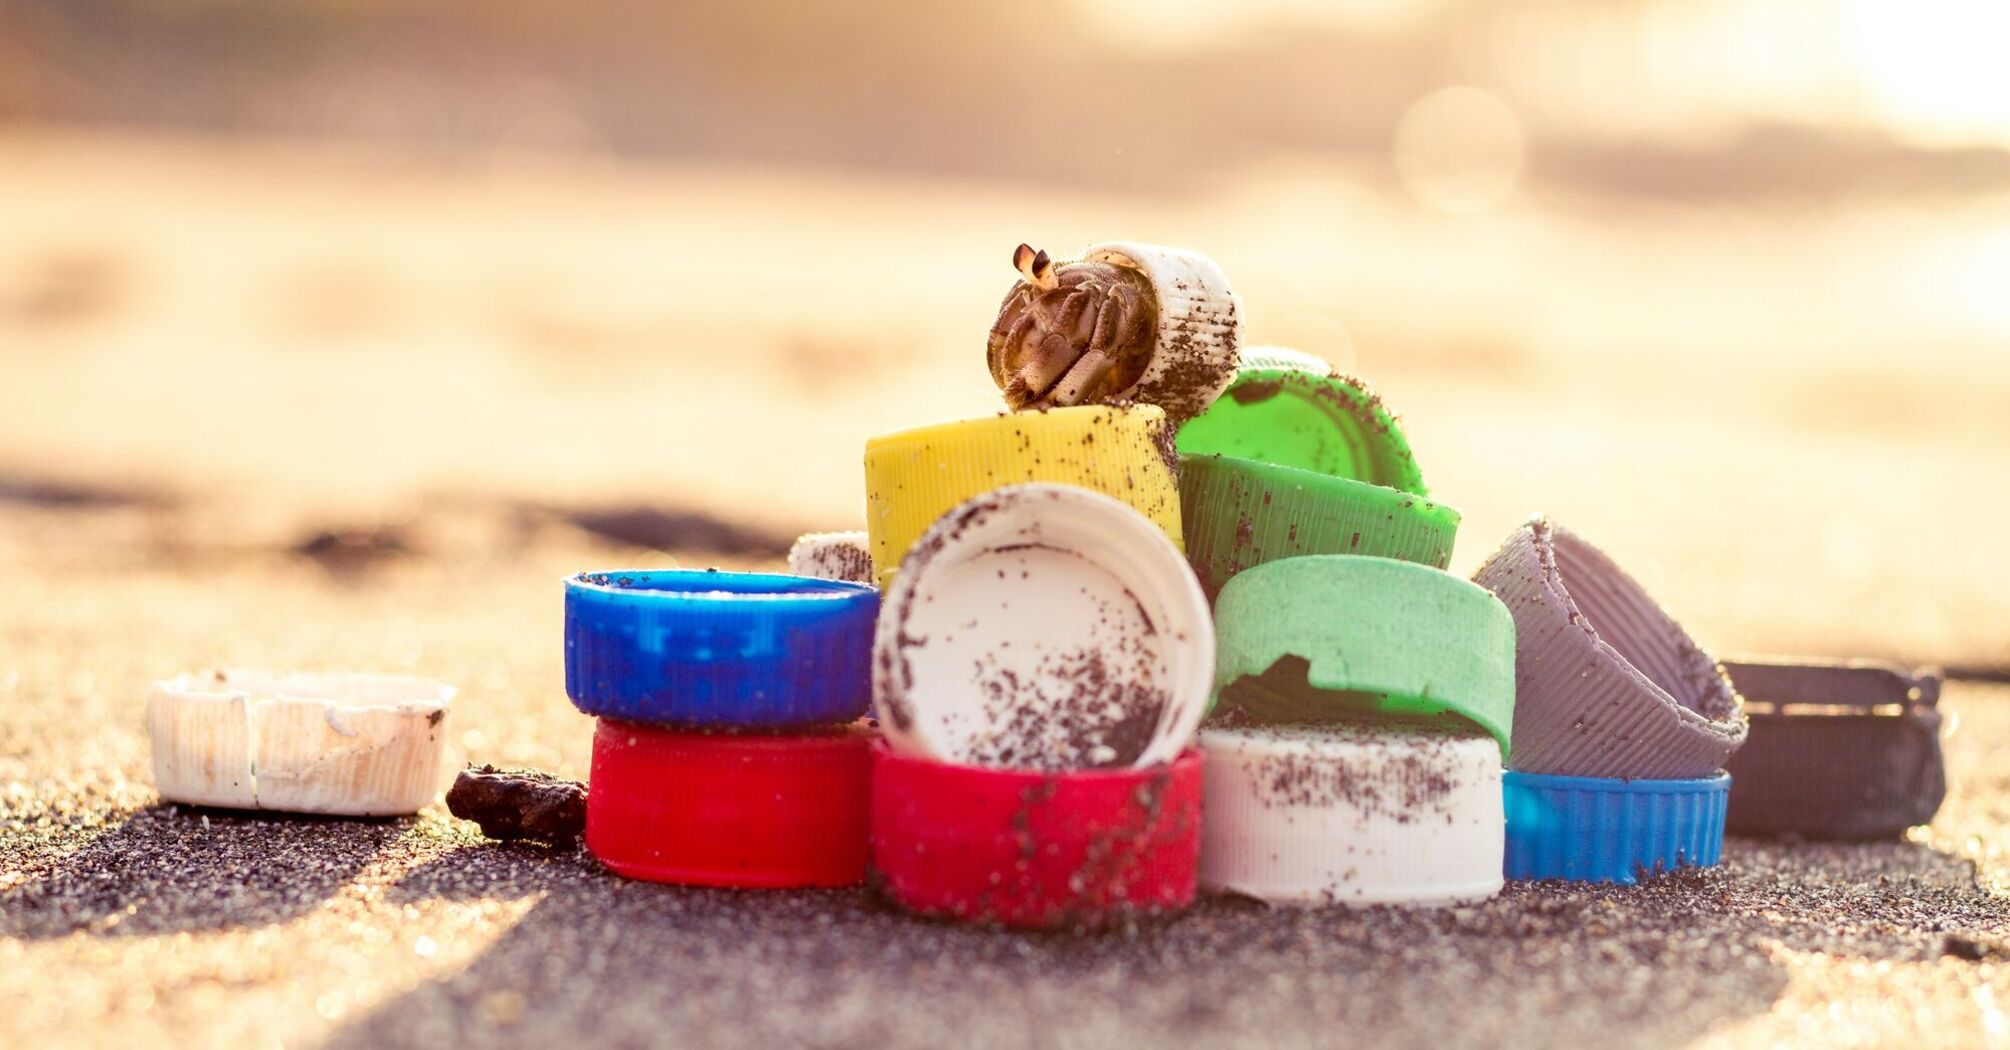 A collection of colorful plastic caps and other small plastic items washed up on a sandy beach